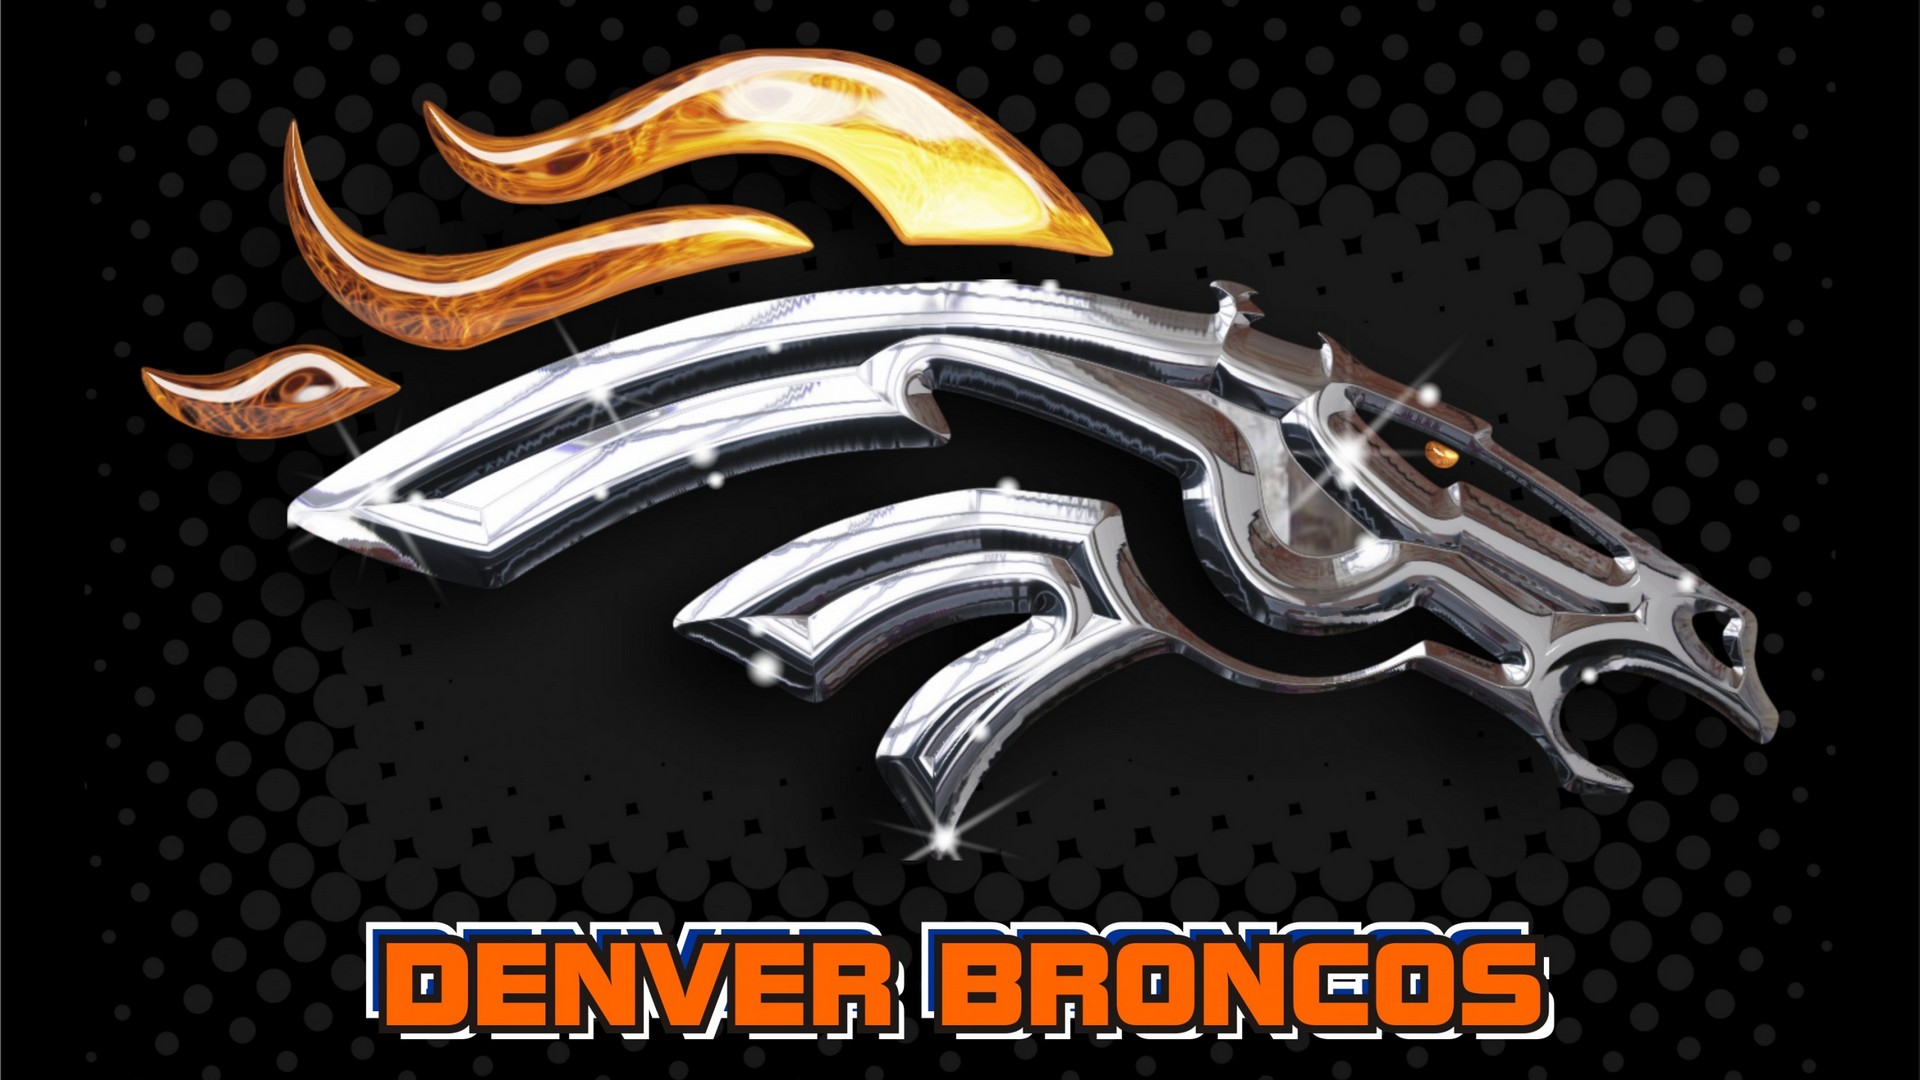 Denver Broncos Laptop Wallpaper With high-resolution 1920X1080 pixel. Download and set as wallpaper for Desktop Computer, Apple iPhone X, XS Max, XR, 8, 7, 6, SE, iPad, Android